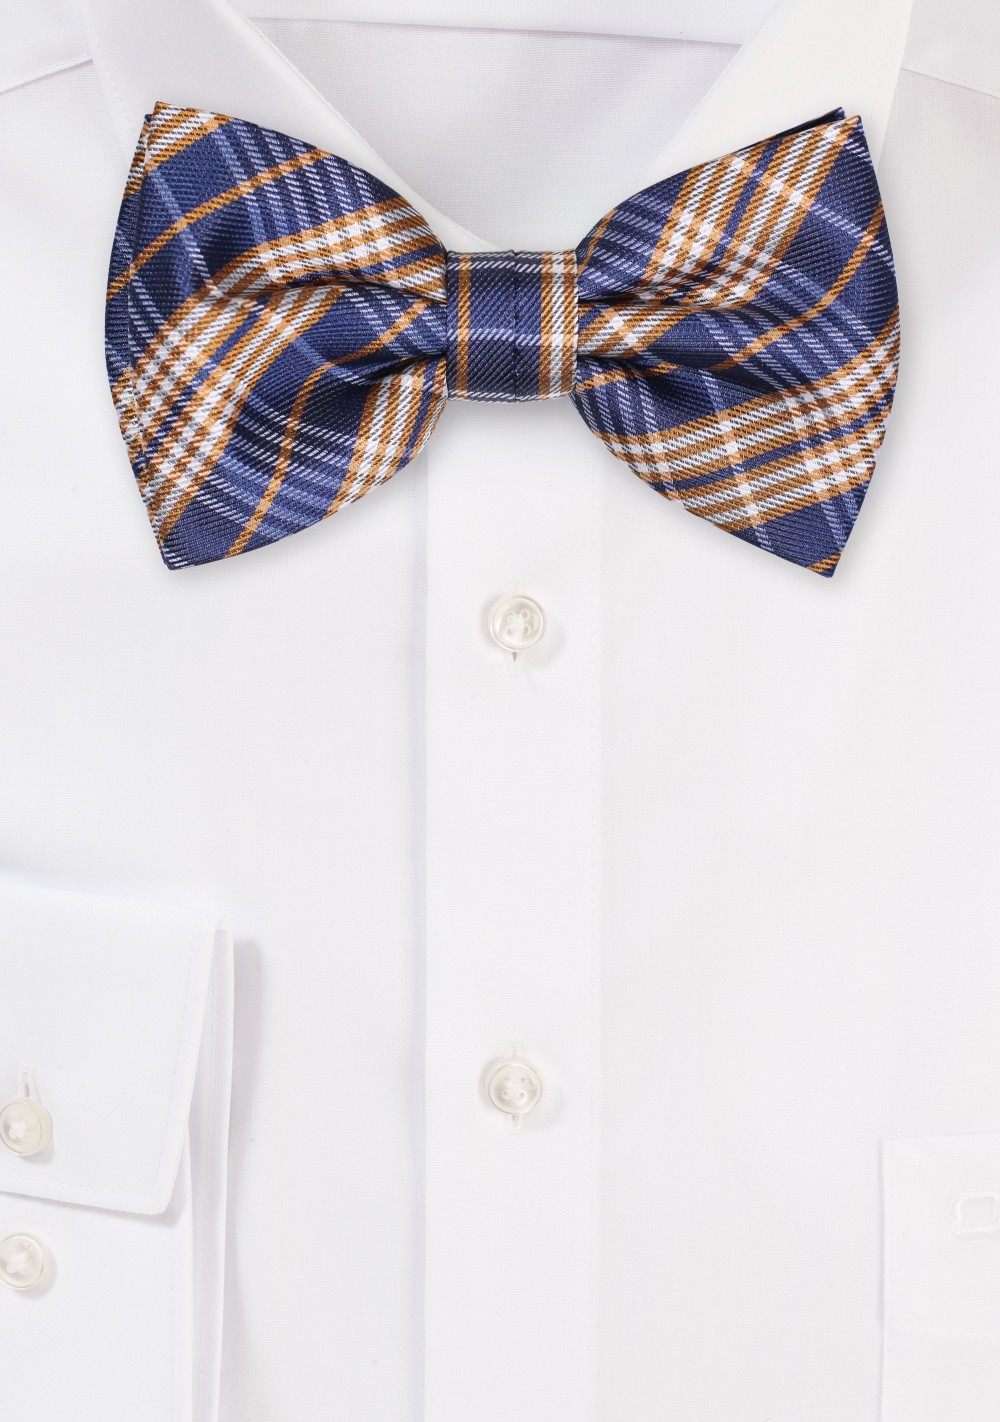 Checkered Bowtie in Navy and Gold